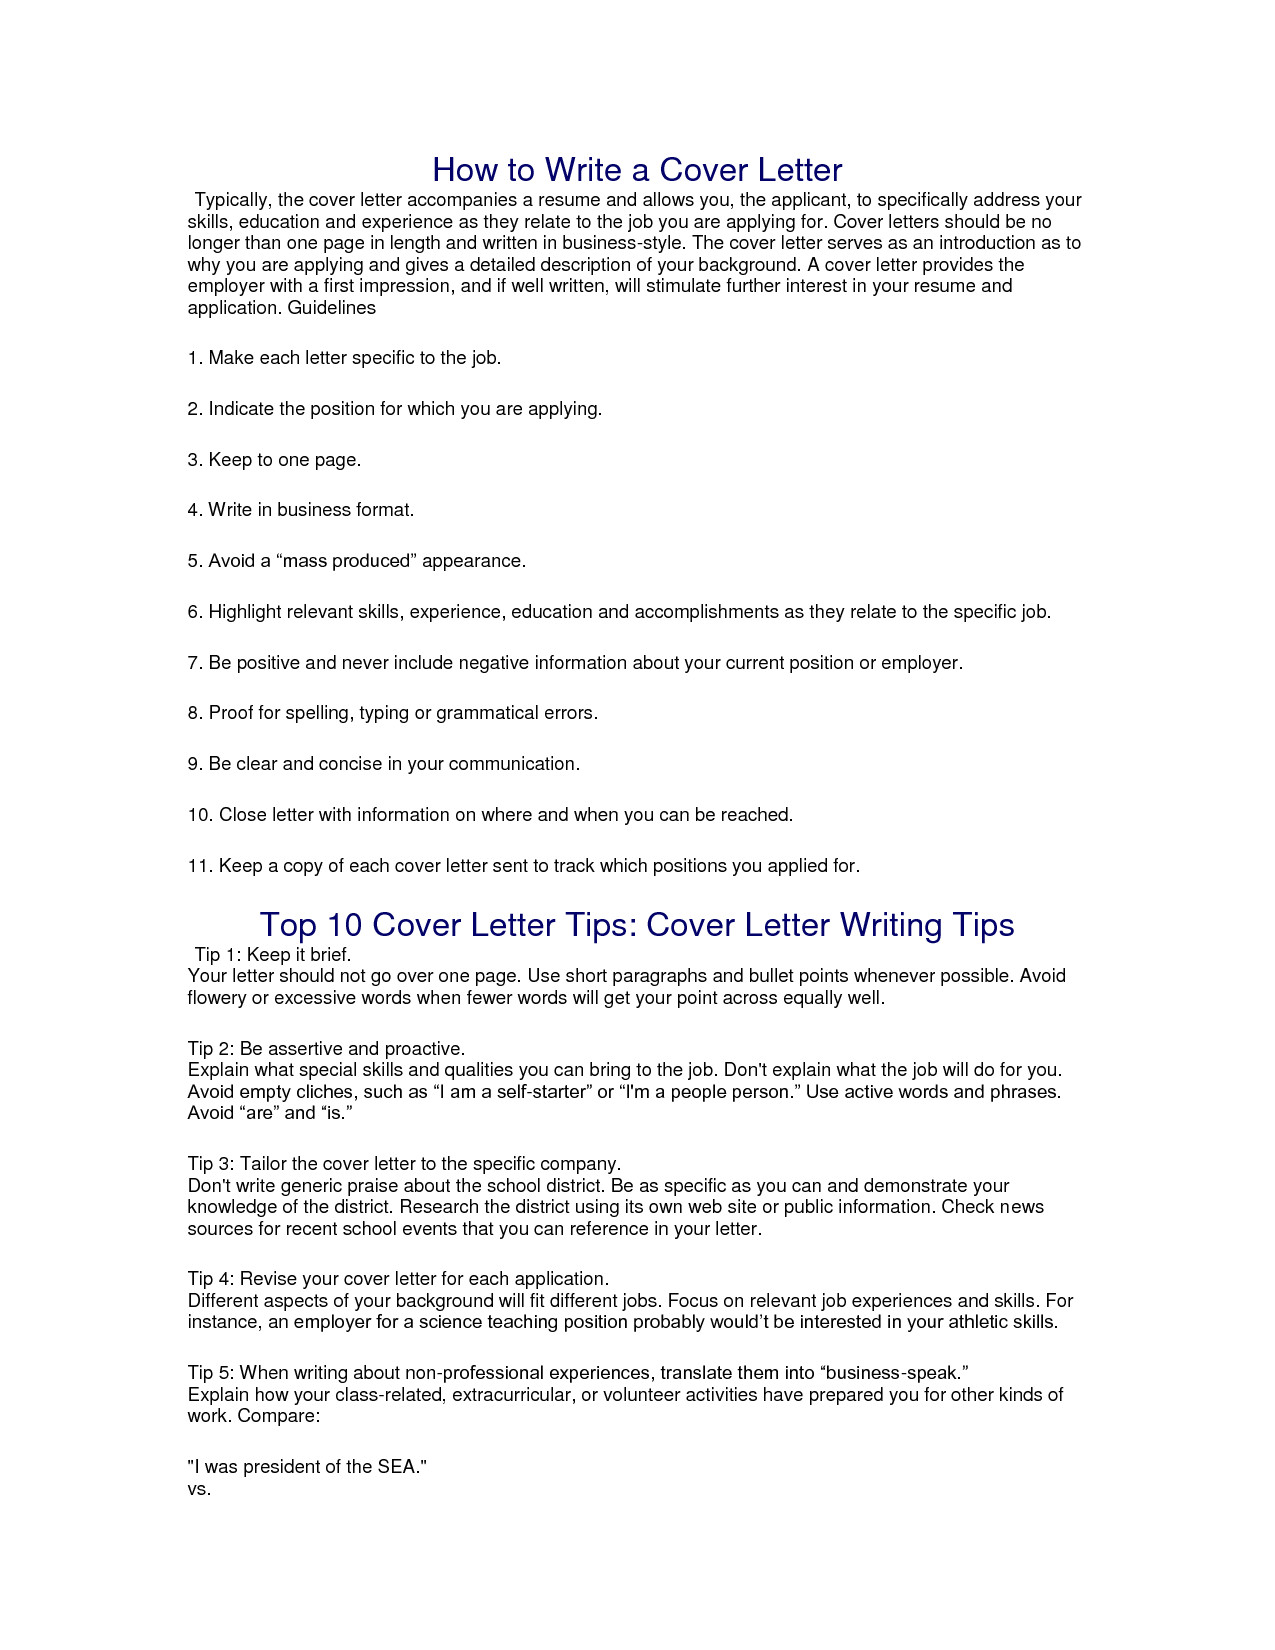 how should you write a cover letter